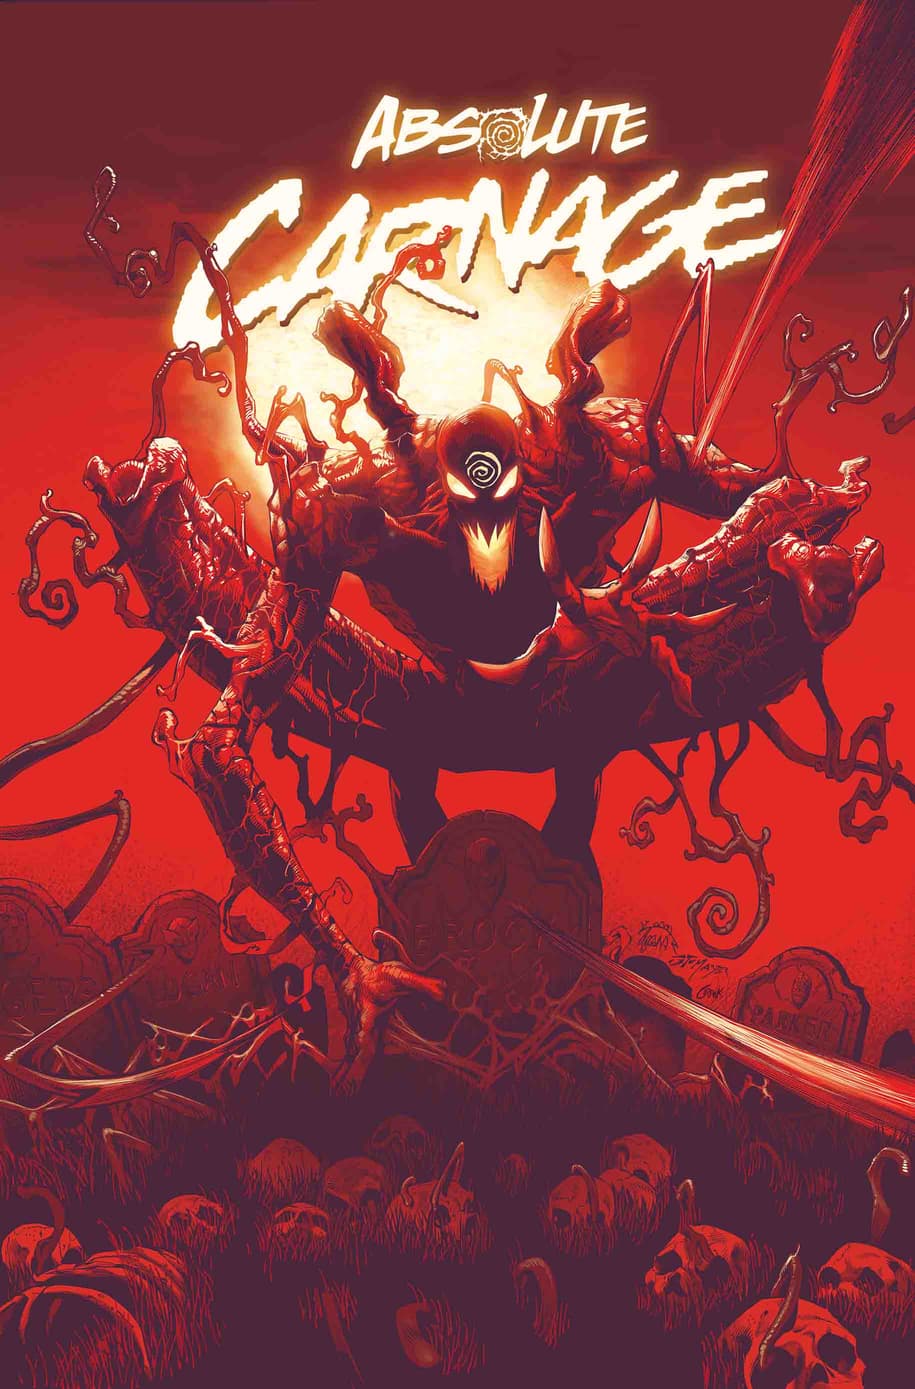 ABSOLUTE CARNAGE #1 cover pencils by Ryan Stegman